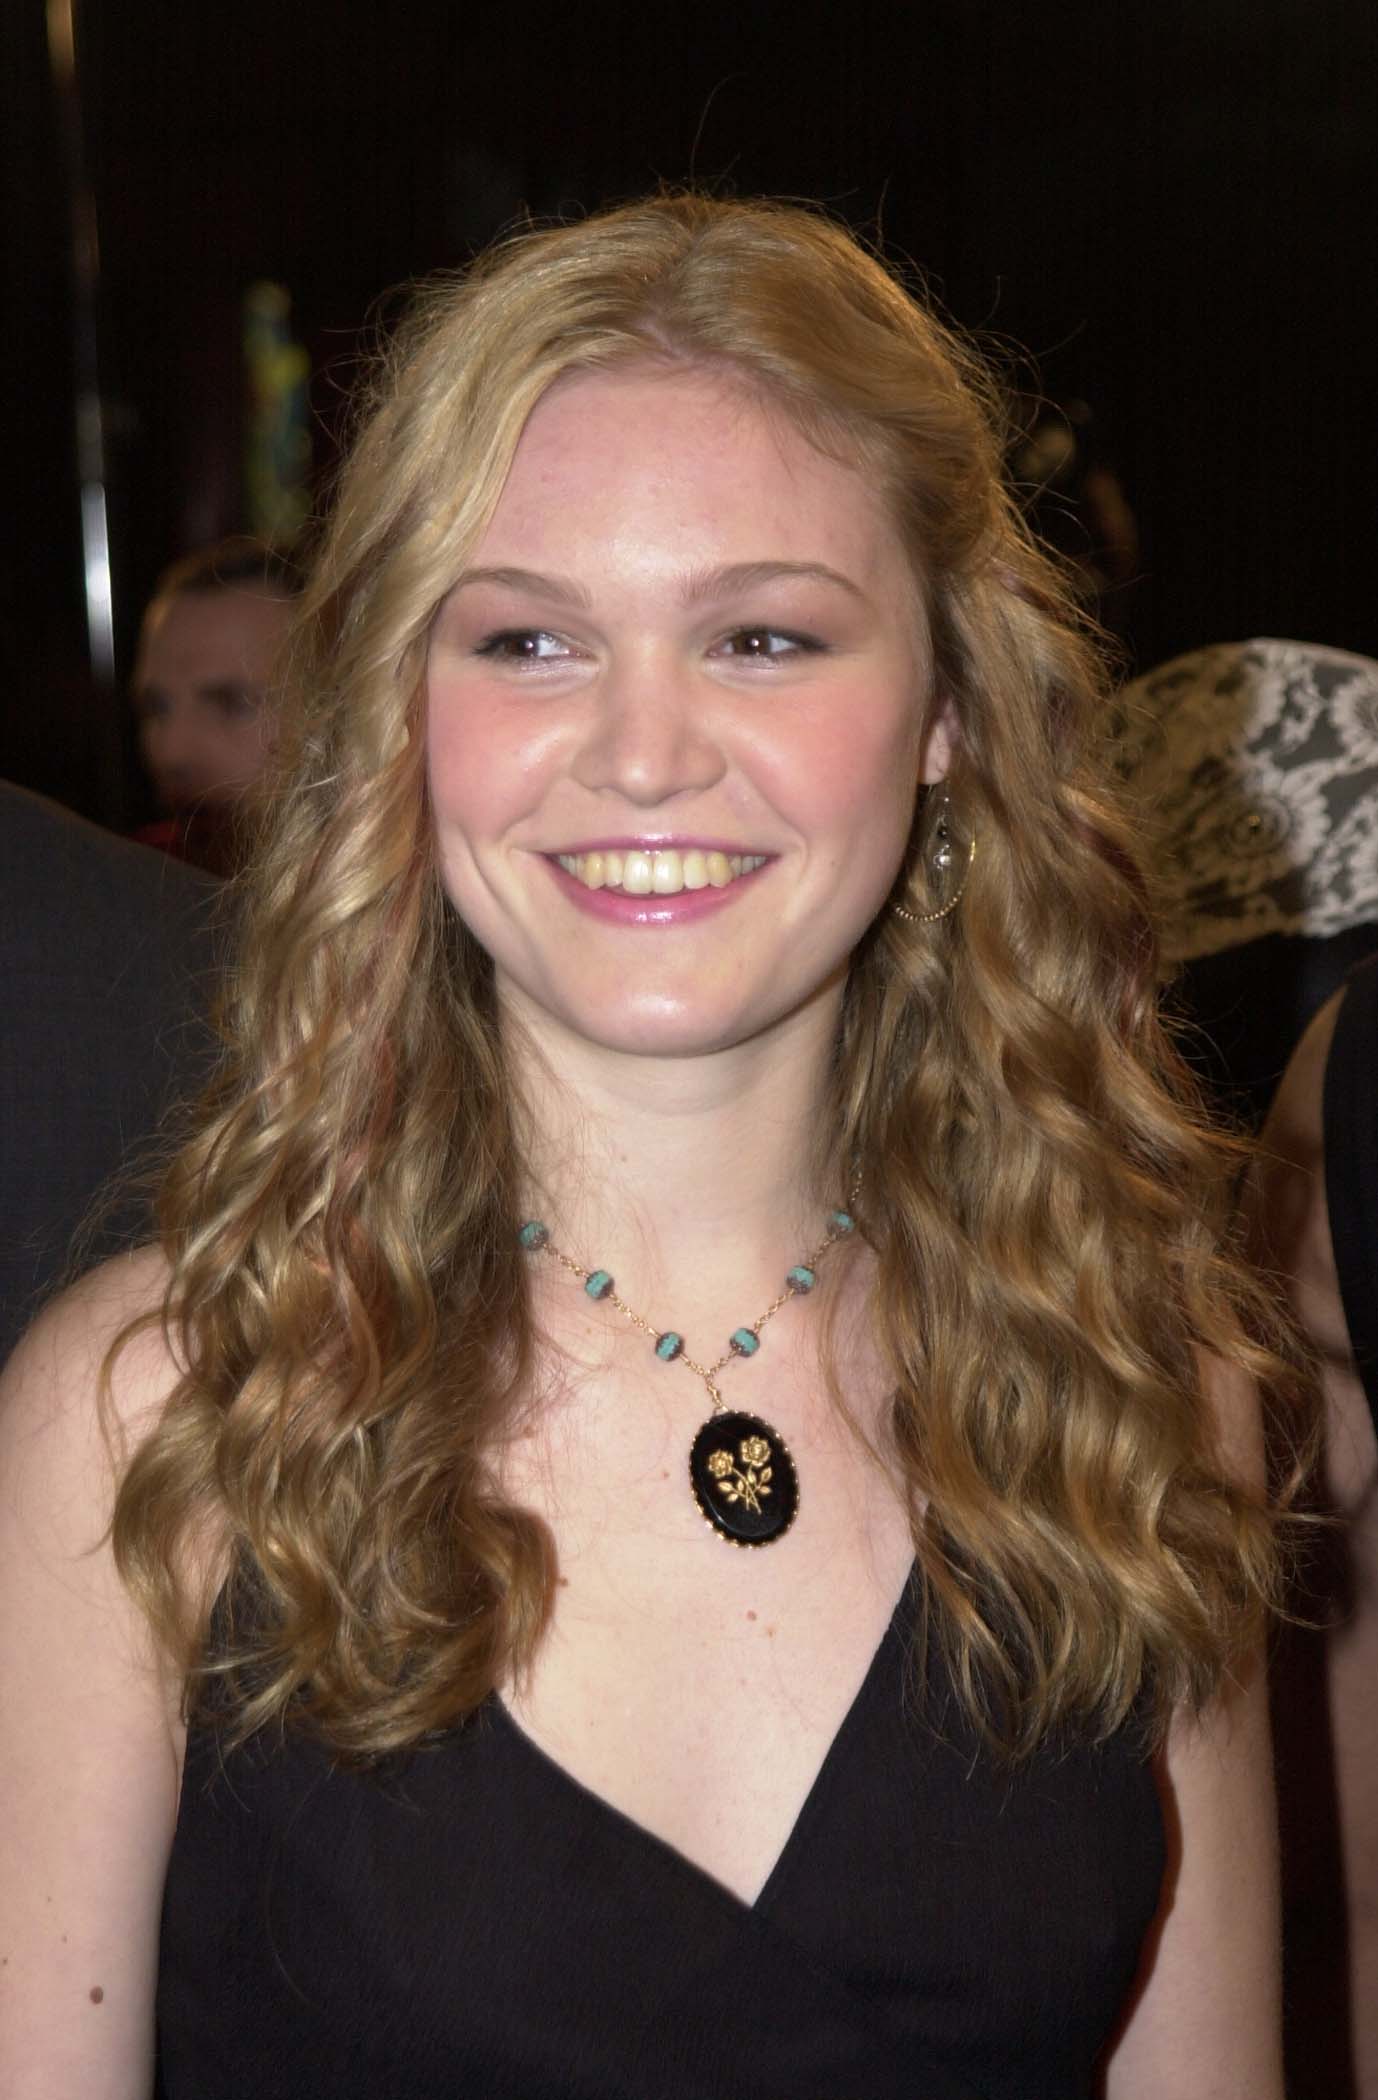 Julia Stiles during the film 'Save the Last Dance.' | Source: Getty Images